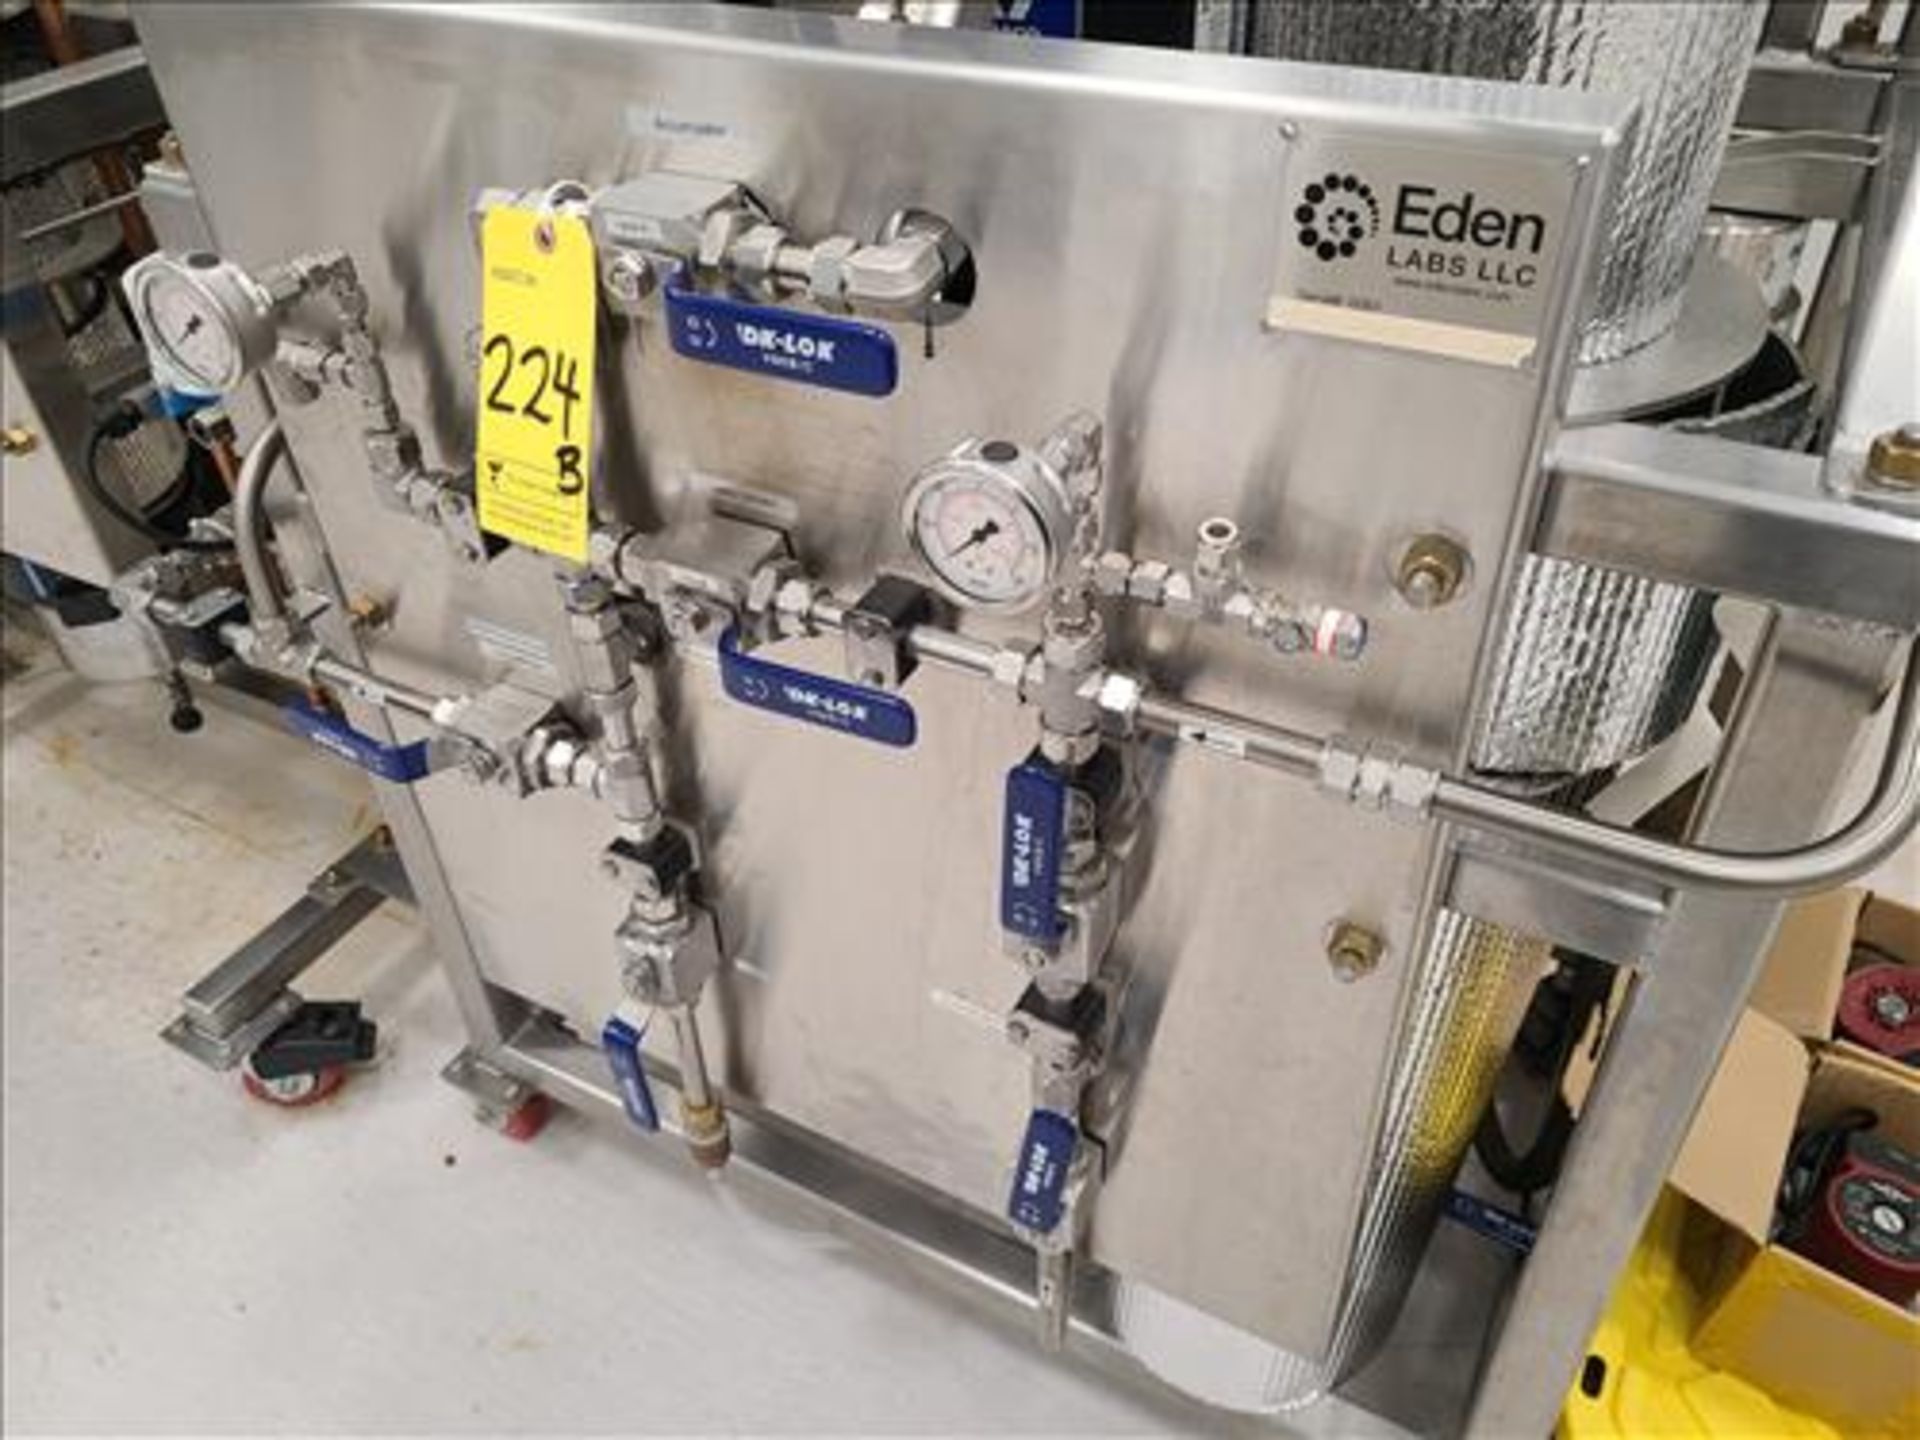 Eden Labs Cannabis extraction system, s/n 0261, incl.: Eden Labs s/s accumulator c/w Graco E-FLODC - Image 3 of 36